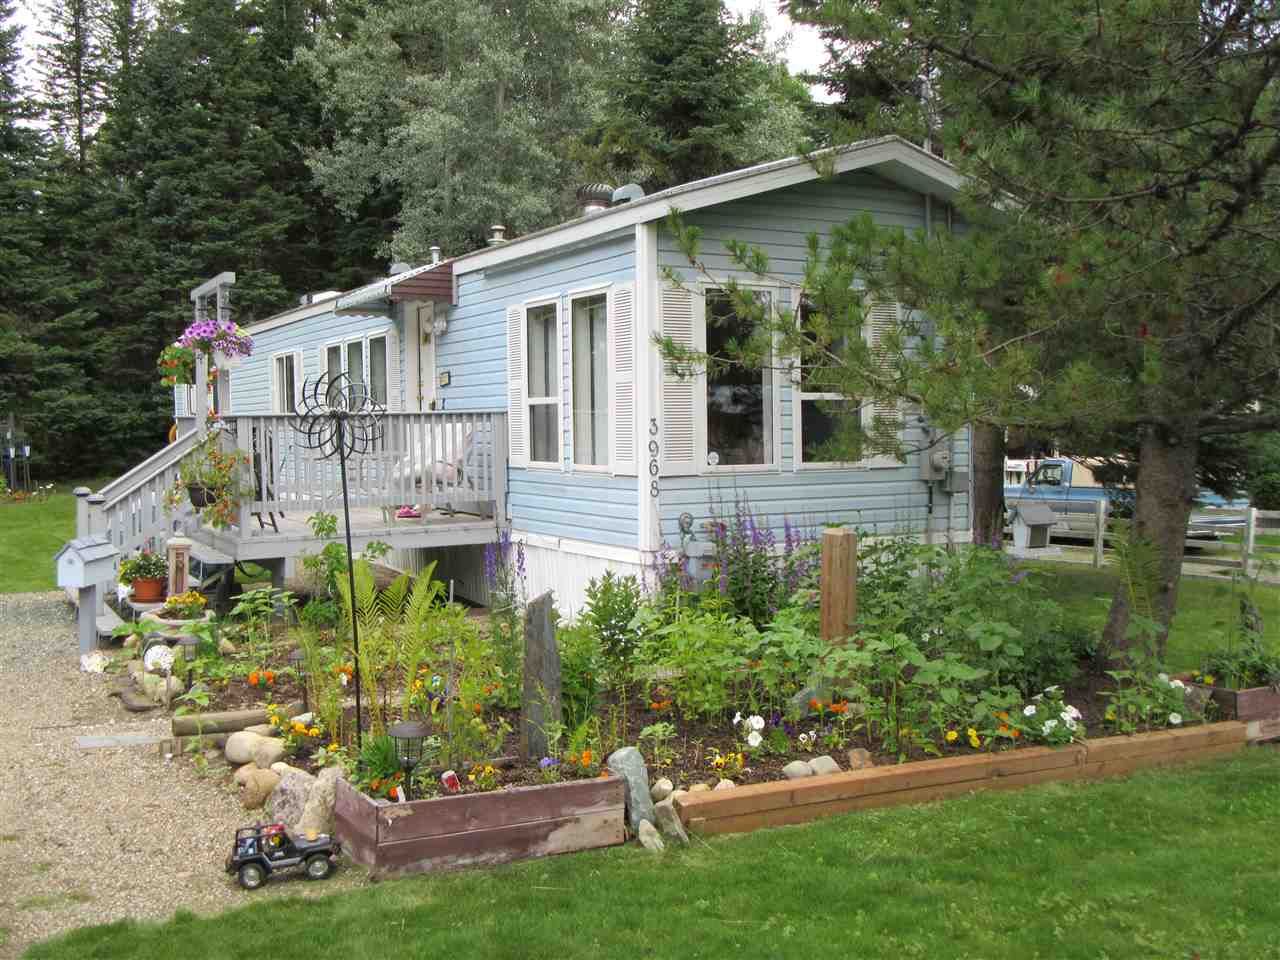 Main Photo: 3968 DIAMOND Drive in Prince George: Emerald Manufactured Home for sale (PG City North (Zone 73))  : MLS®# R2390964